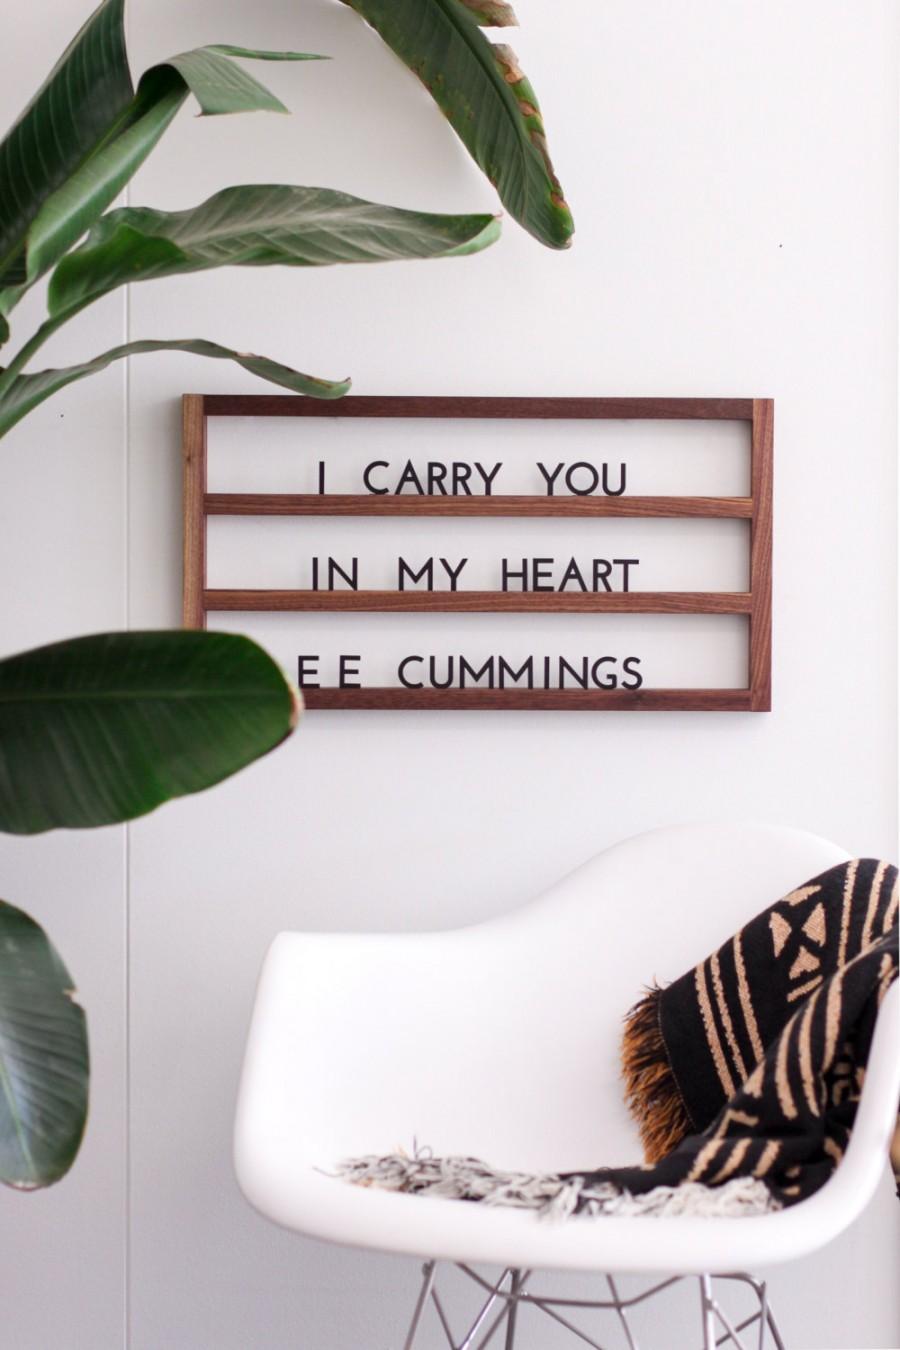 Wedding - The Muse : Solid Walnut + Black Acrylic Floating Letter Board (also available with white acrylic)